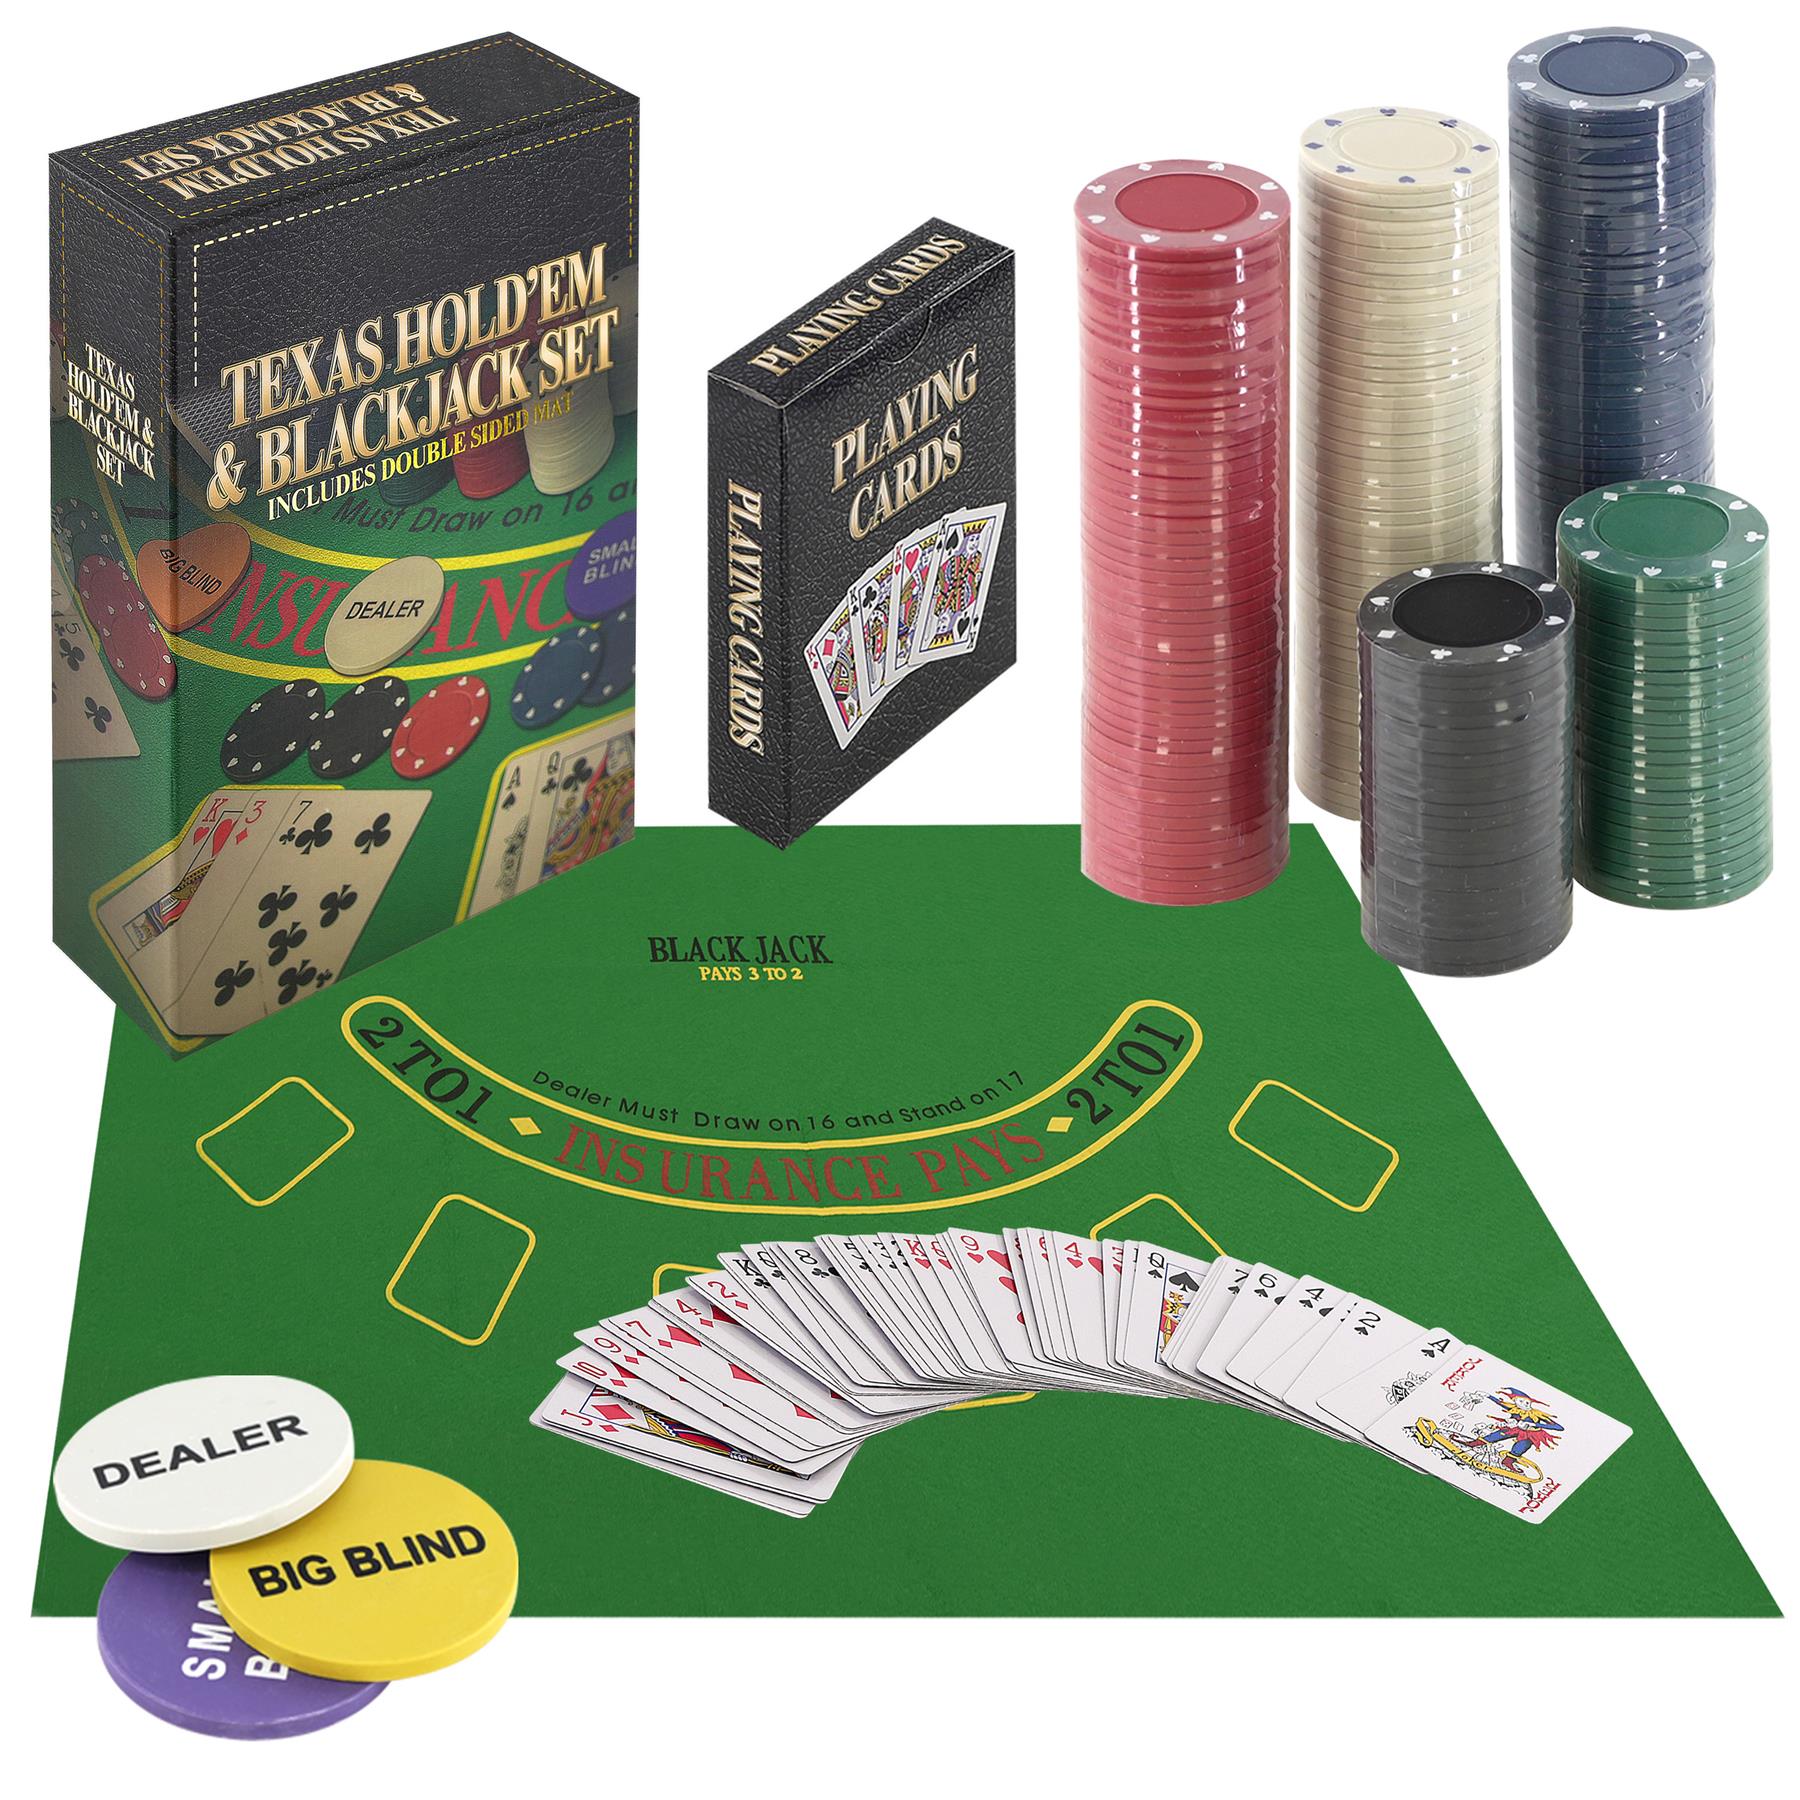 2 in 1 Texas Hold'em & Blackjack Set by The Magic Toy Shop - The Magic Toy Shop